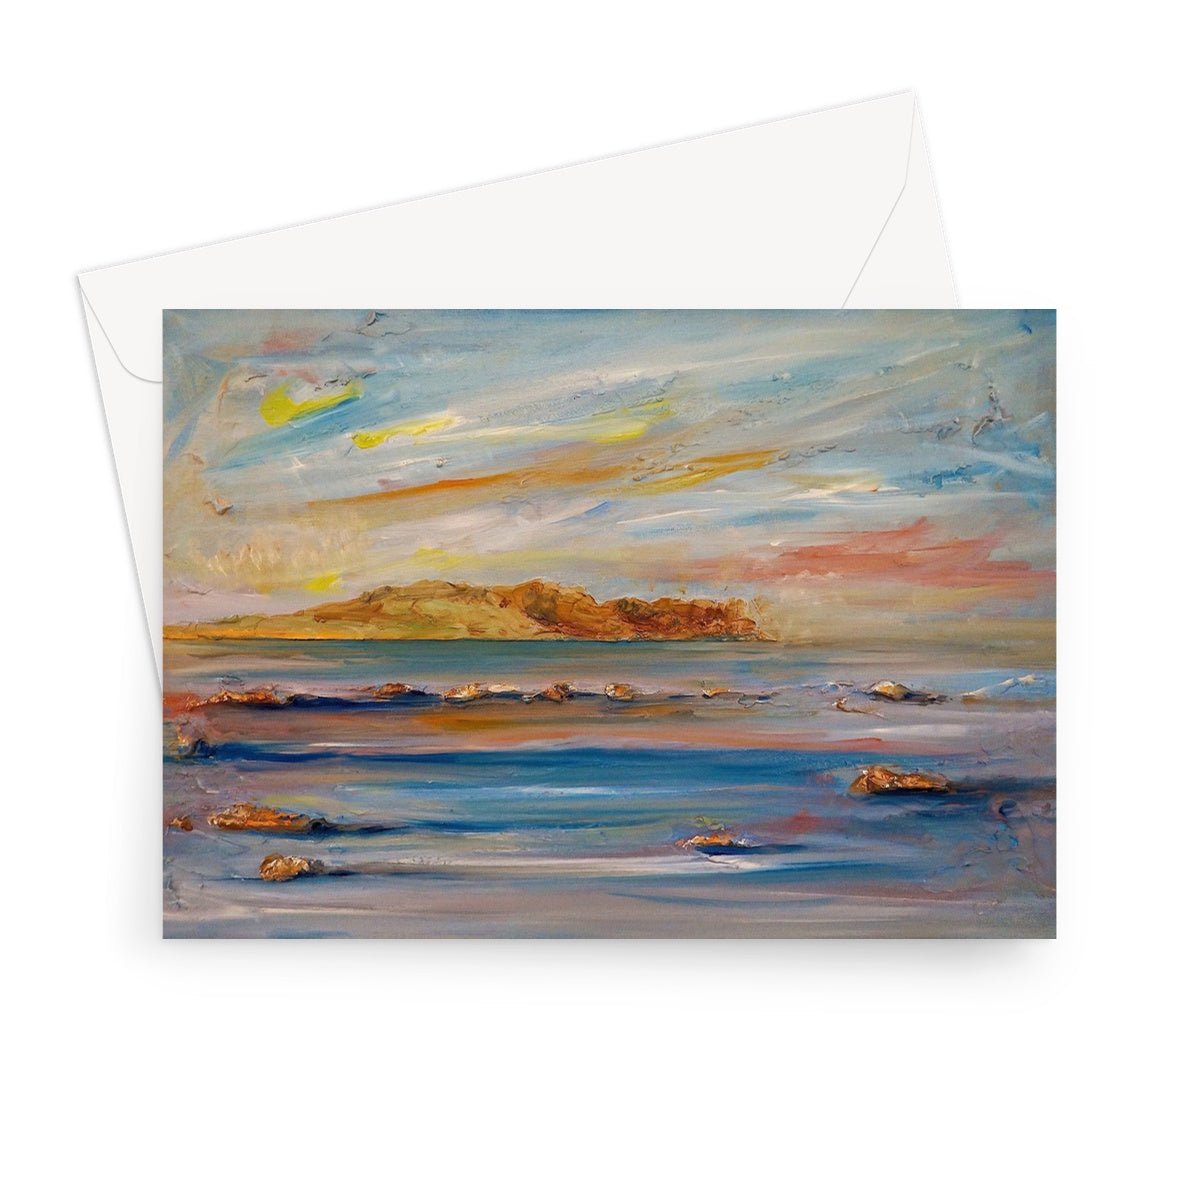 Tiree Dawn Art Gifts Greeting Card-Greetings Cards-Hebridean Islands Art Gallery-7"x5"-10 Cards-Paintings, Prints, Homeware, Art Gifts From Scotland By Scottish Artist Kevin Hunter